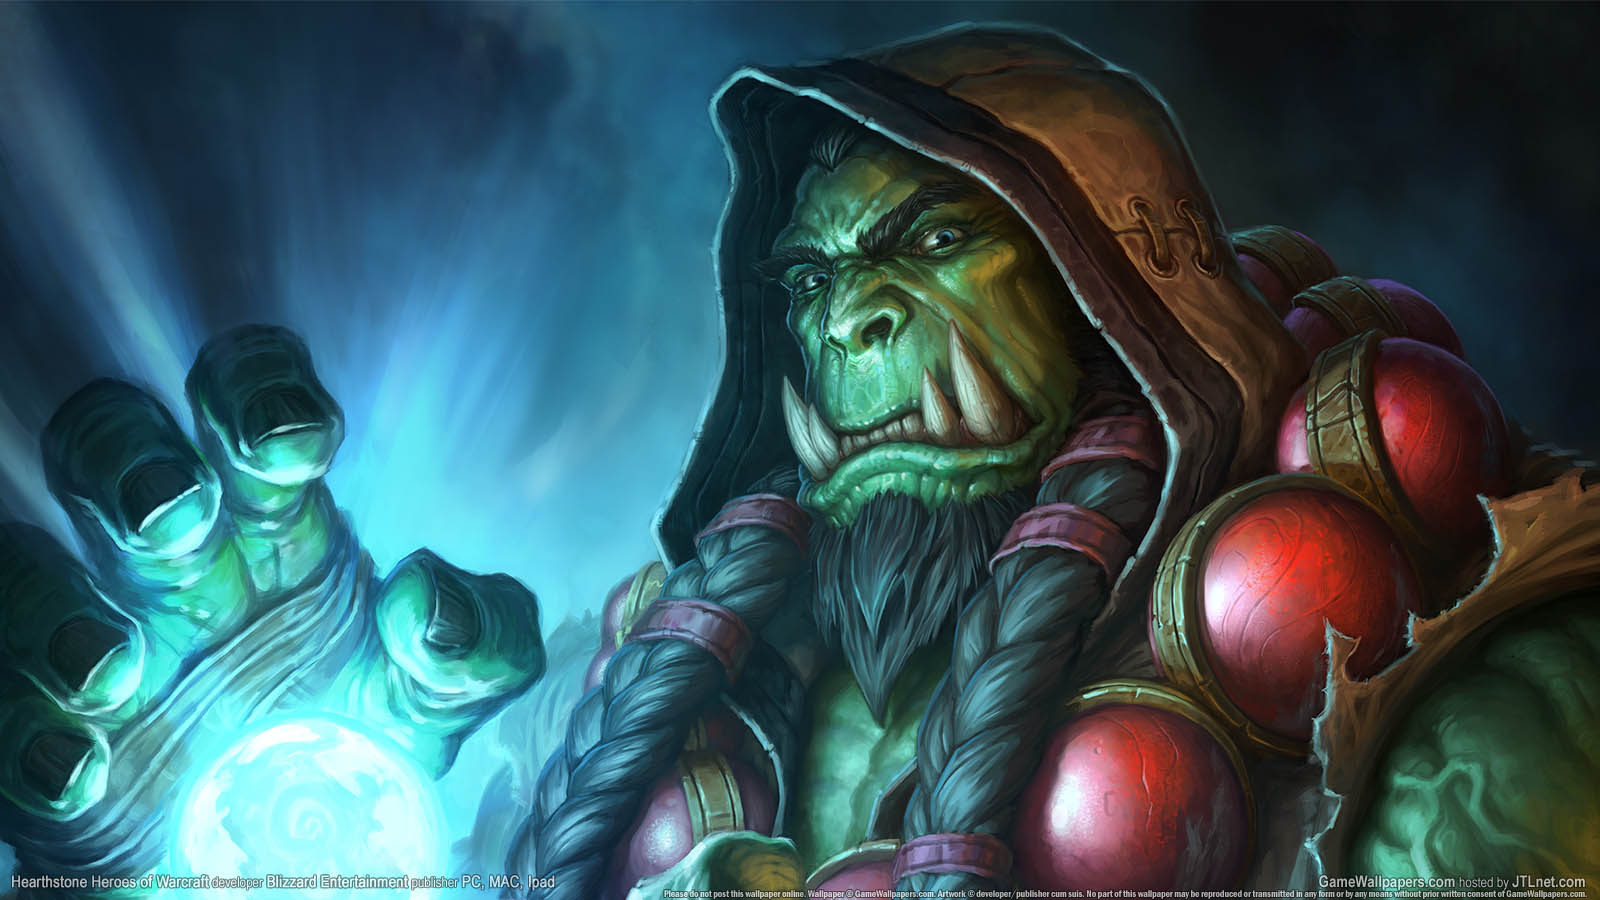 Hearthstone%3A Heroes of Warcraft wallpaper 02 1600x900